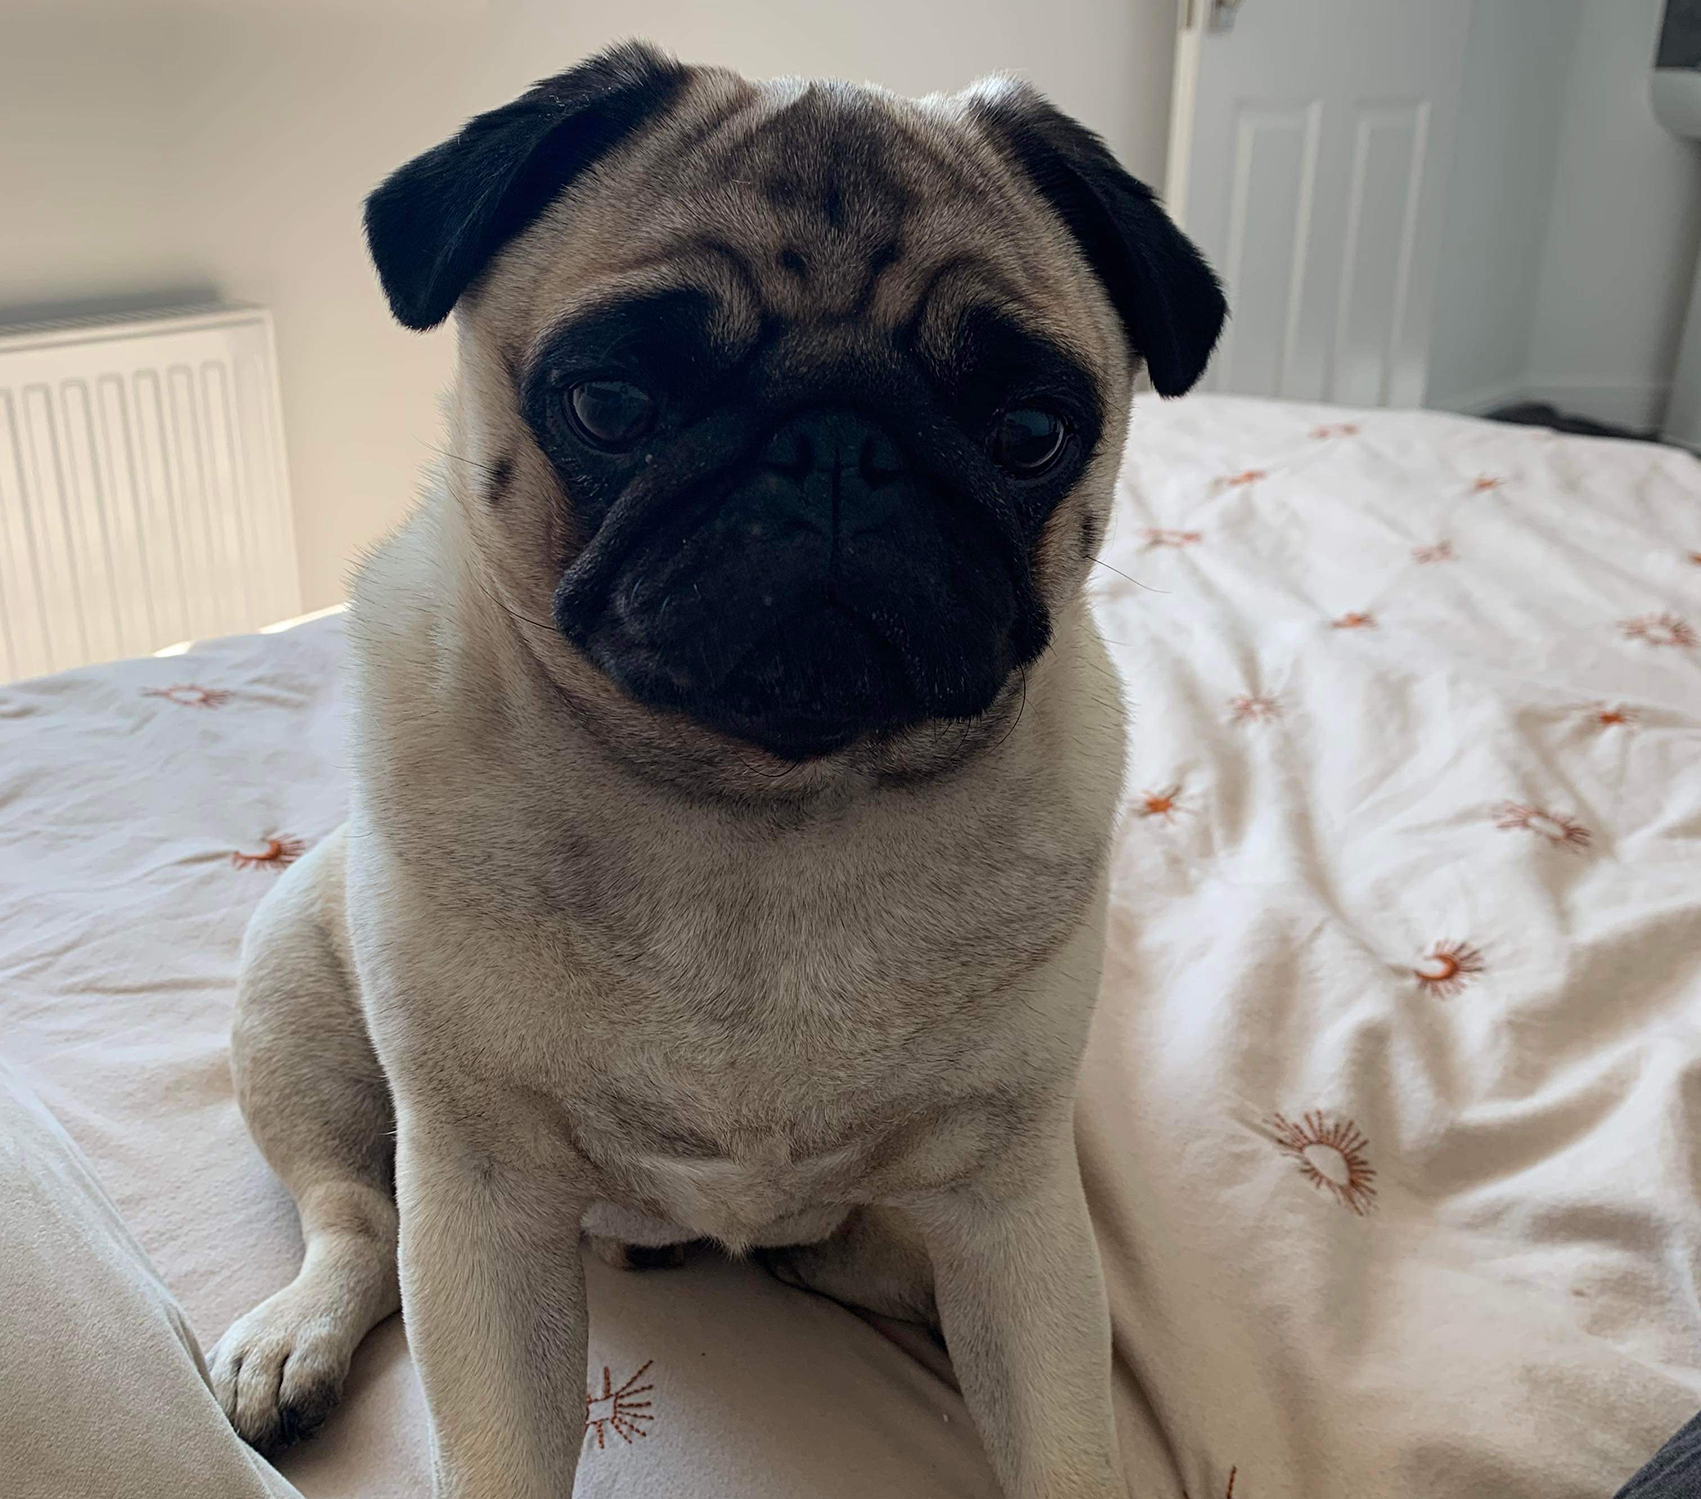 Adoption for Chuggs - image Cheddar on https://pugprotectiontrust.org